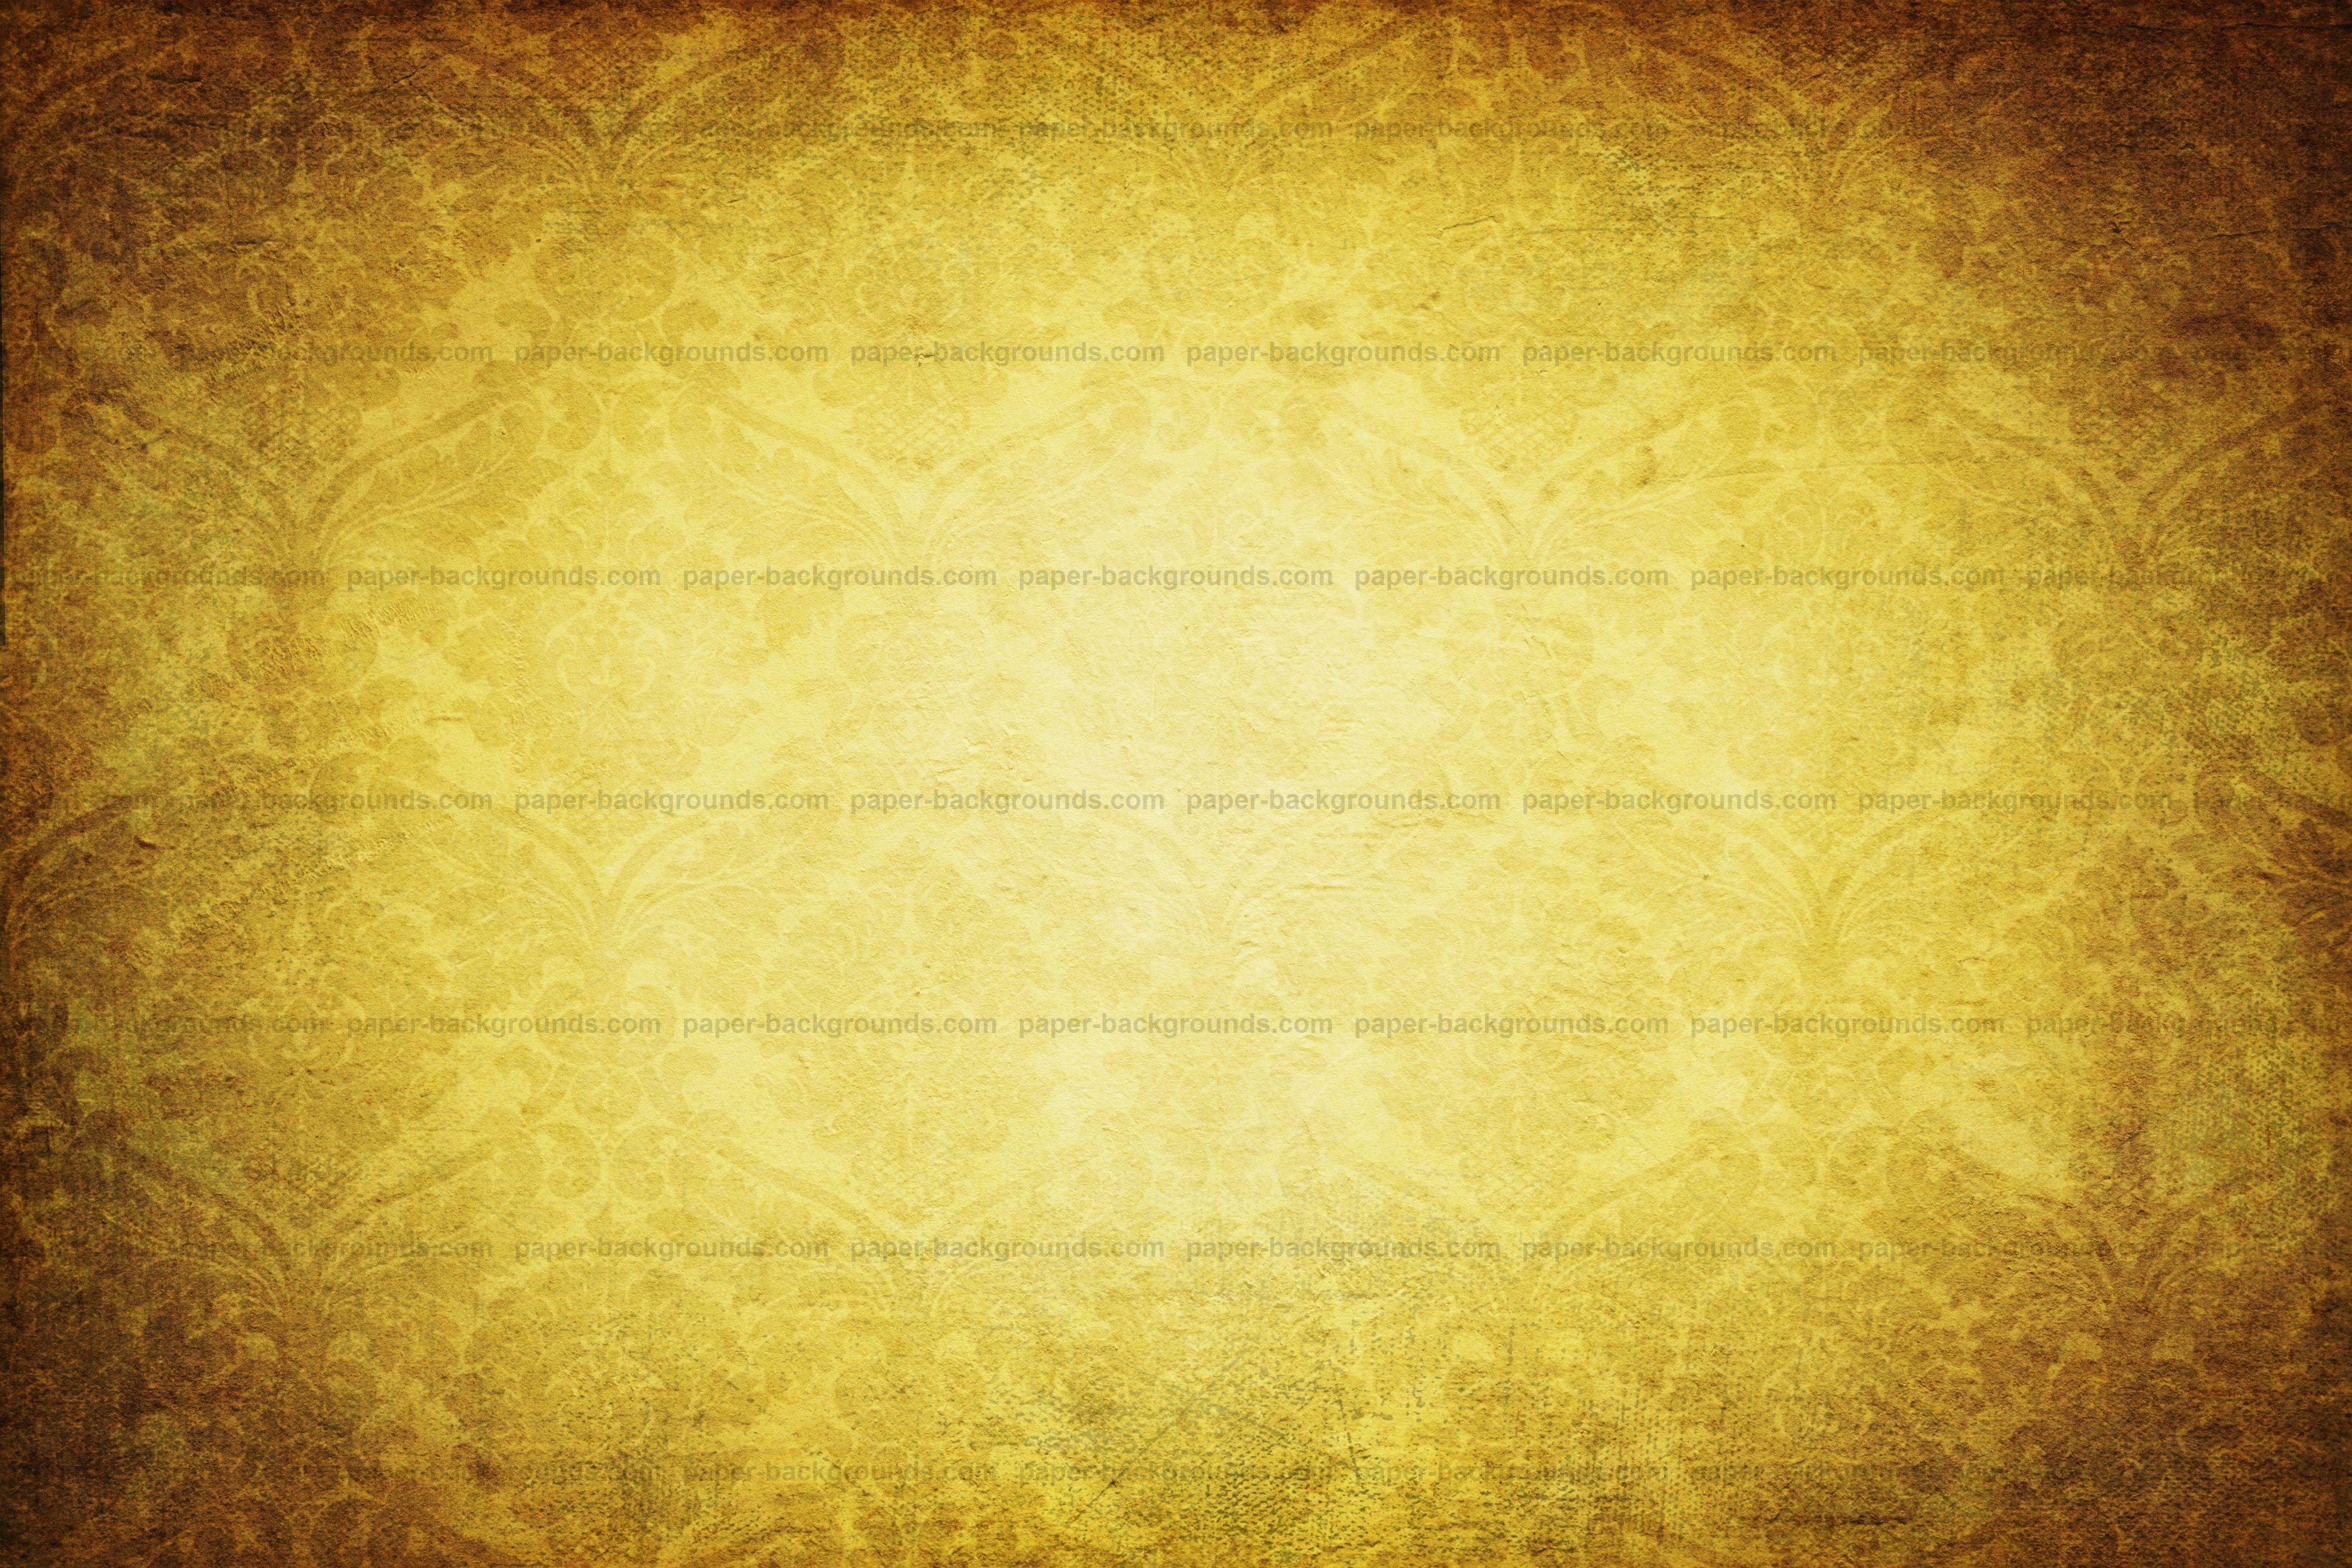 Paper Background. Vintage Shabby Background with Classy Patterns